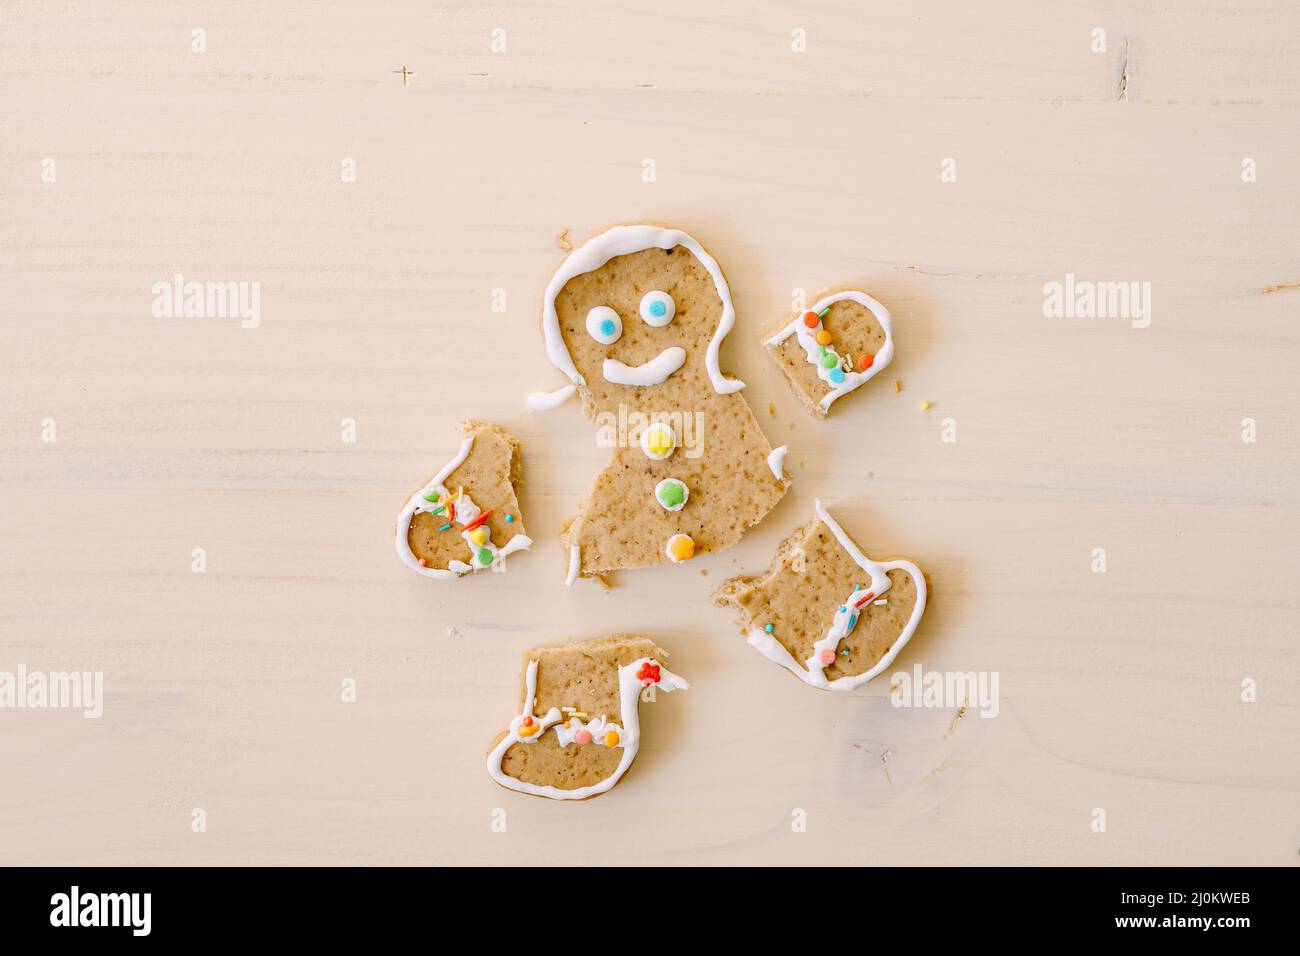 Gingerbread man with severed legs and arms. The limbs of the cookie are separated from the body. Christmas gingerbread on a whit Stock Photo